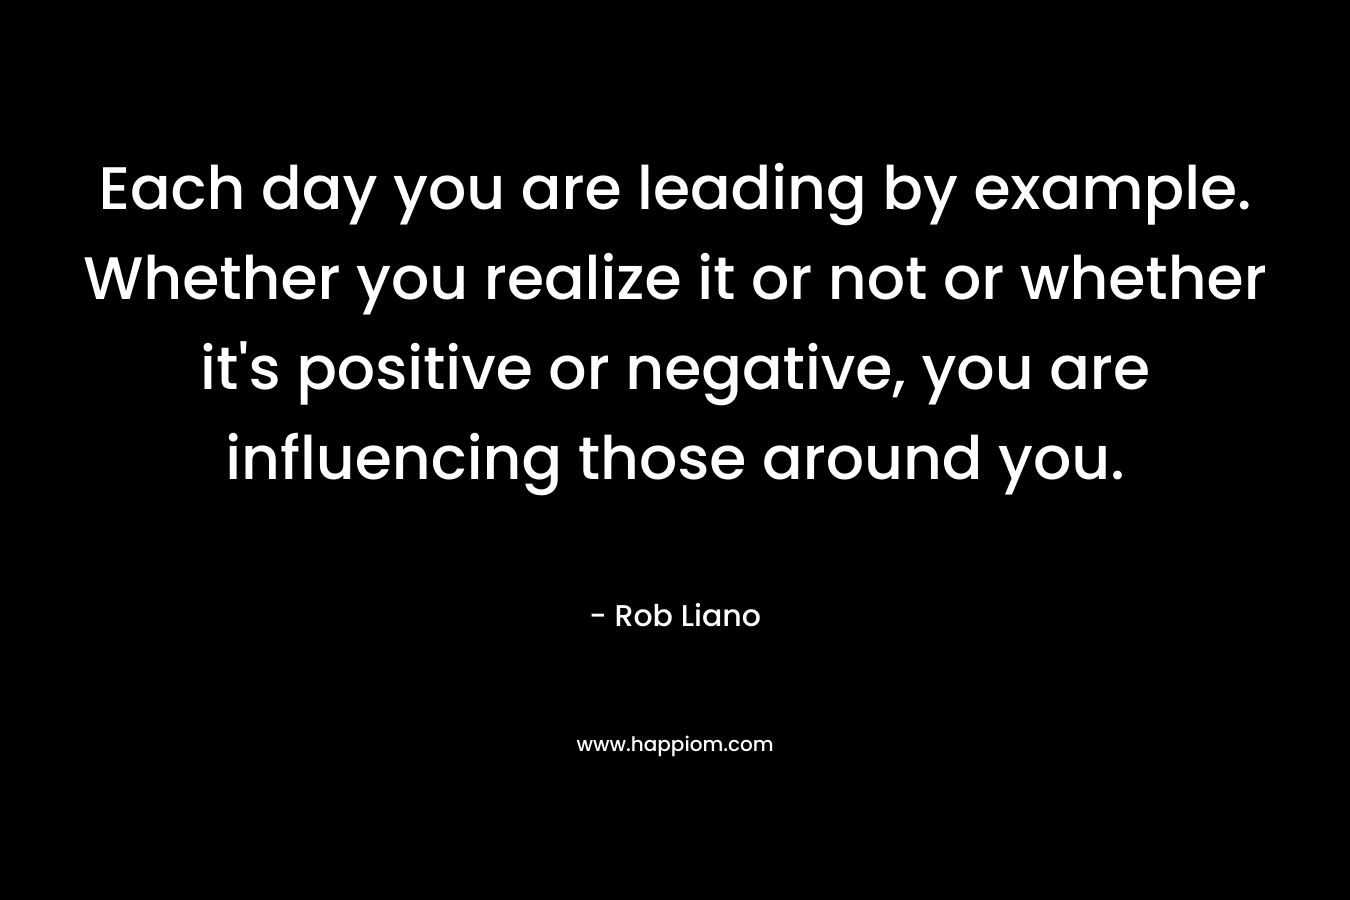 Each day you are leading by example. Whether you realize it or not or whether it’s positive or negative, you are influencing those around you. – Rob Liano